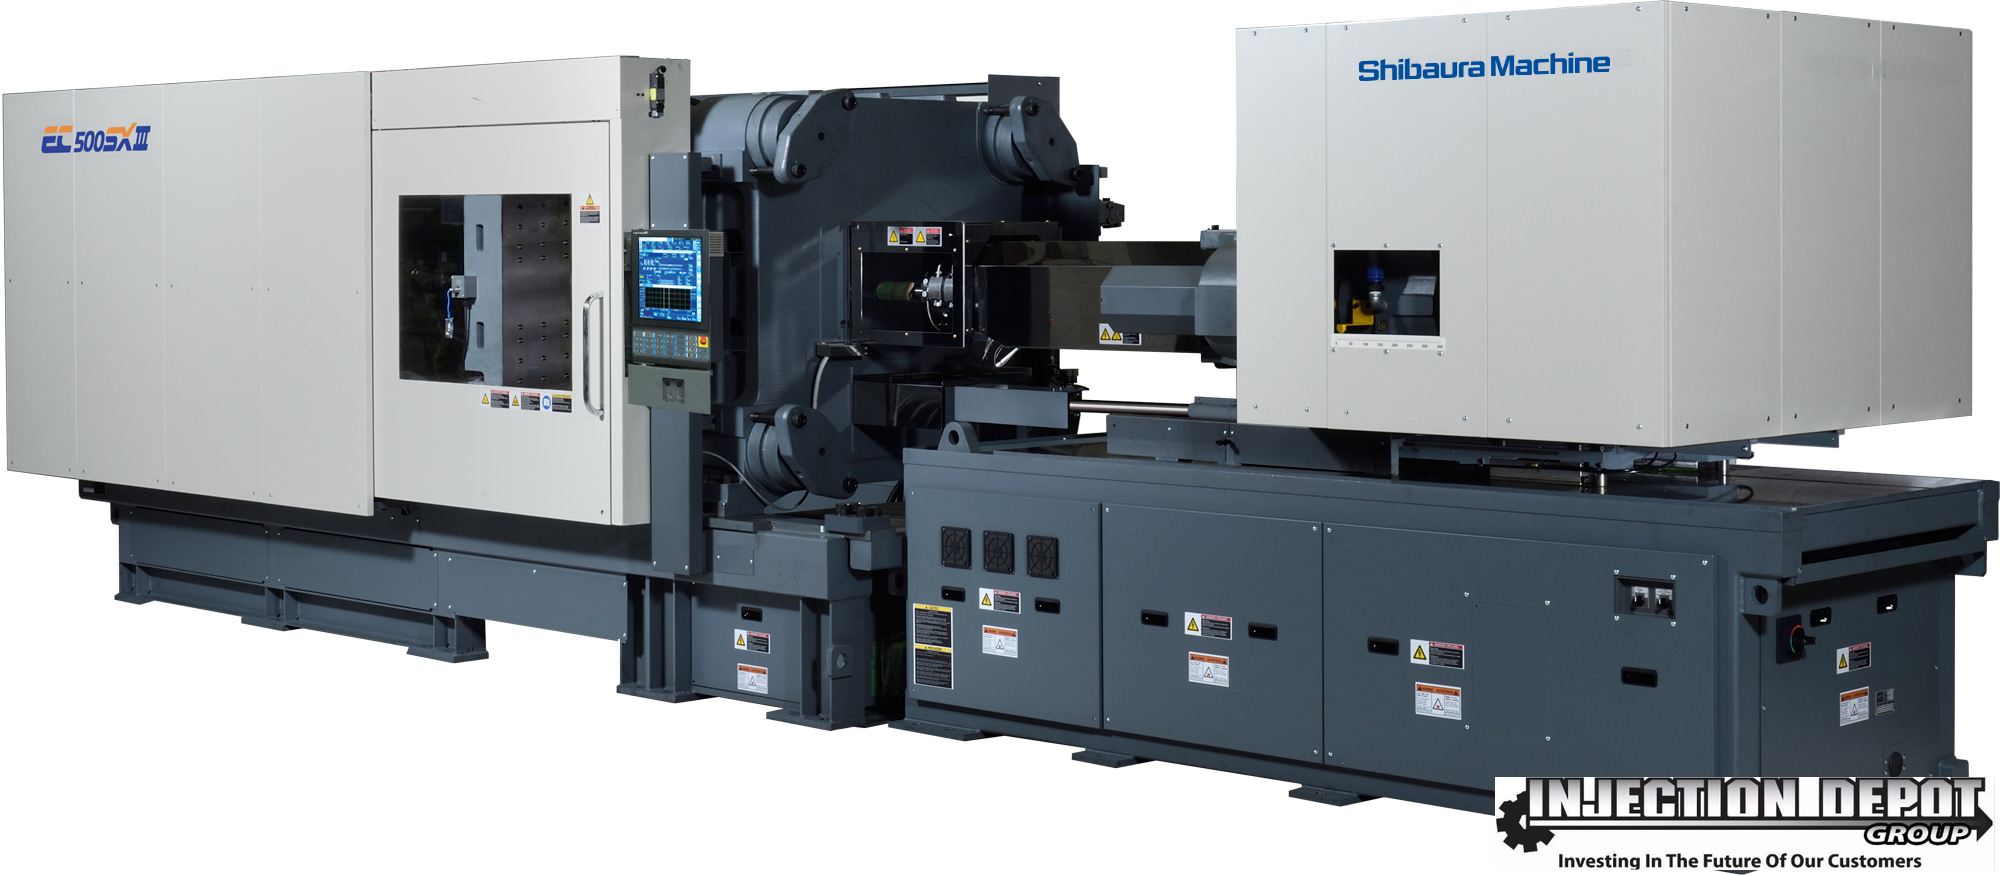 SHIBAURA MACHINE All Electric EC SXIII Horizontal Injection Moulding Machines | INJECTION DEPOT GROUP